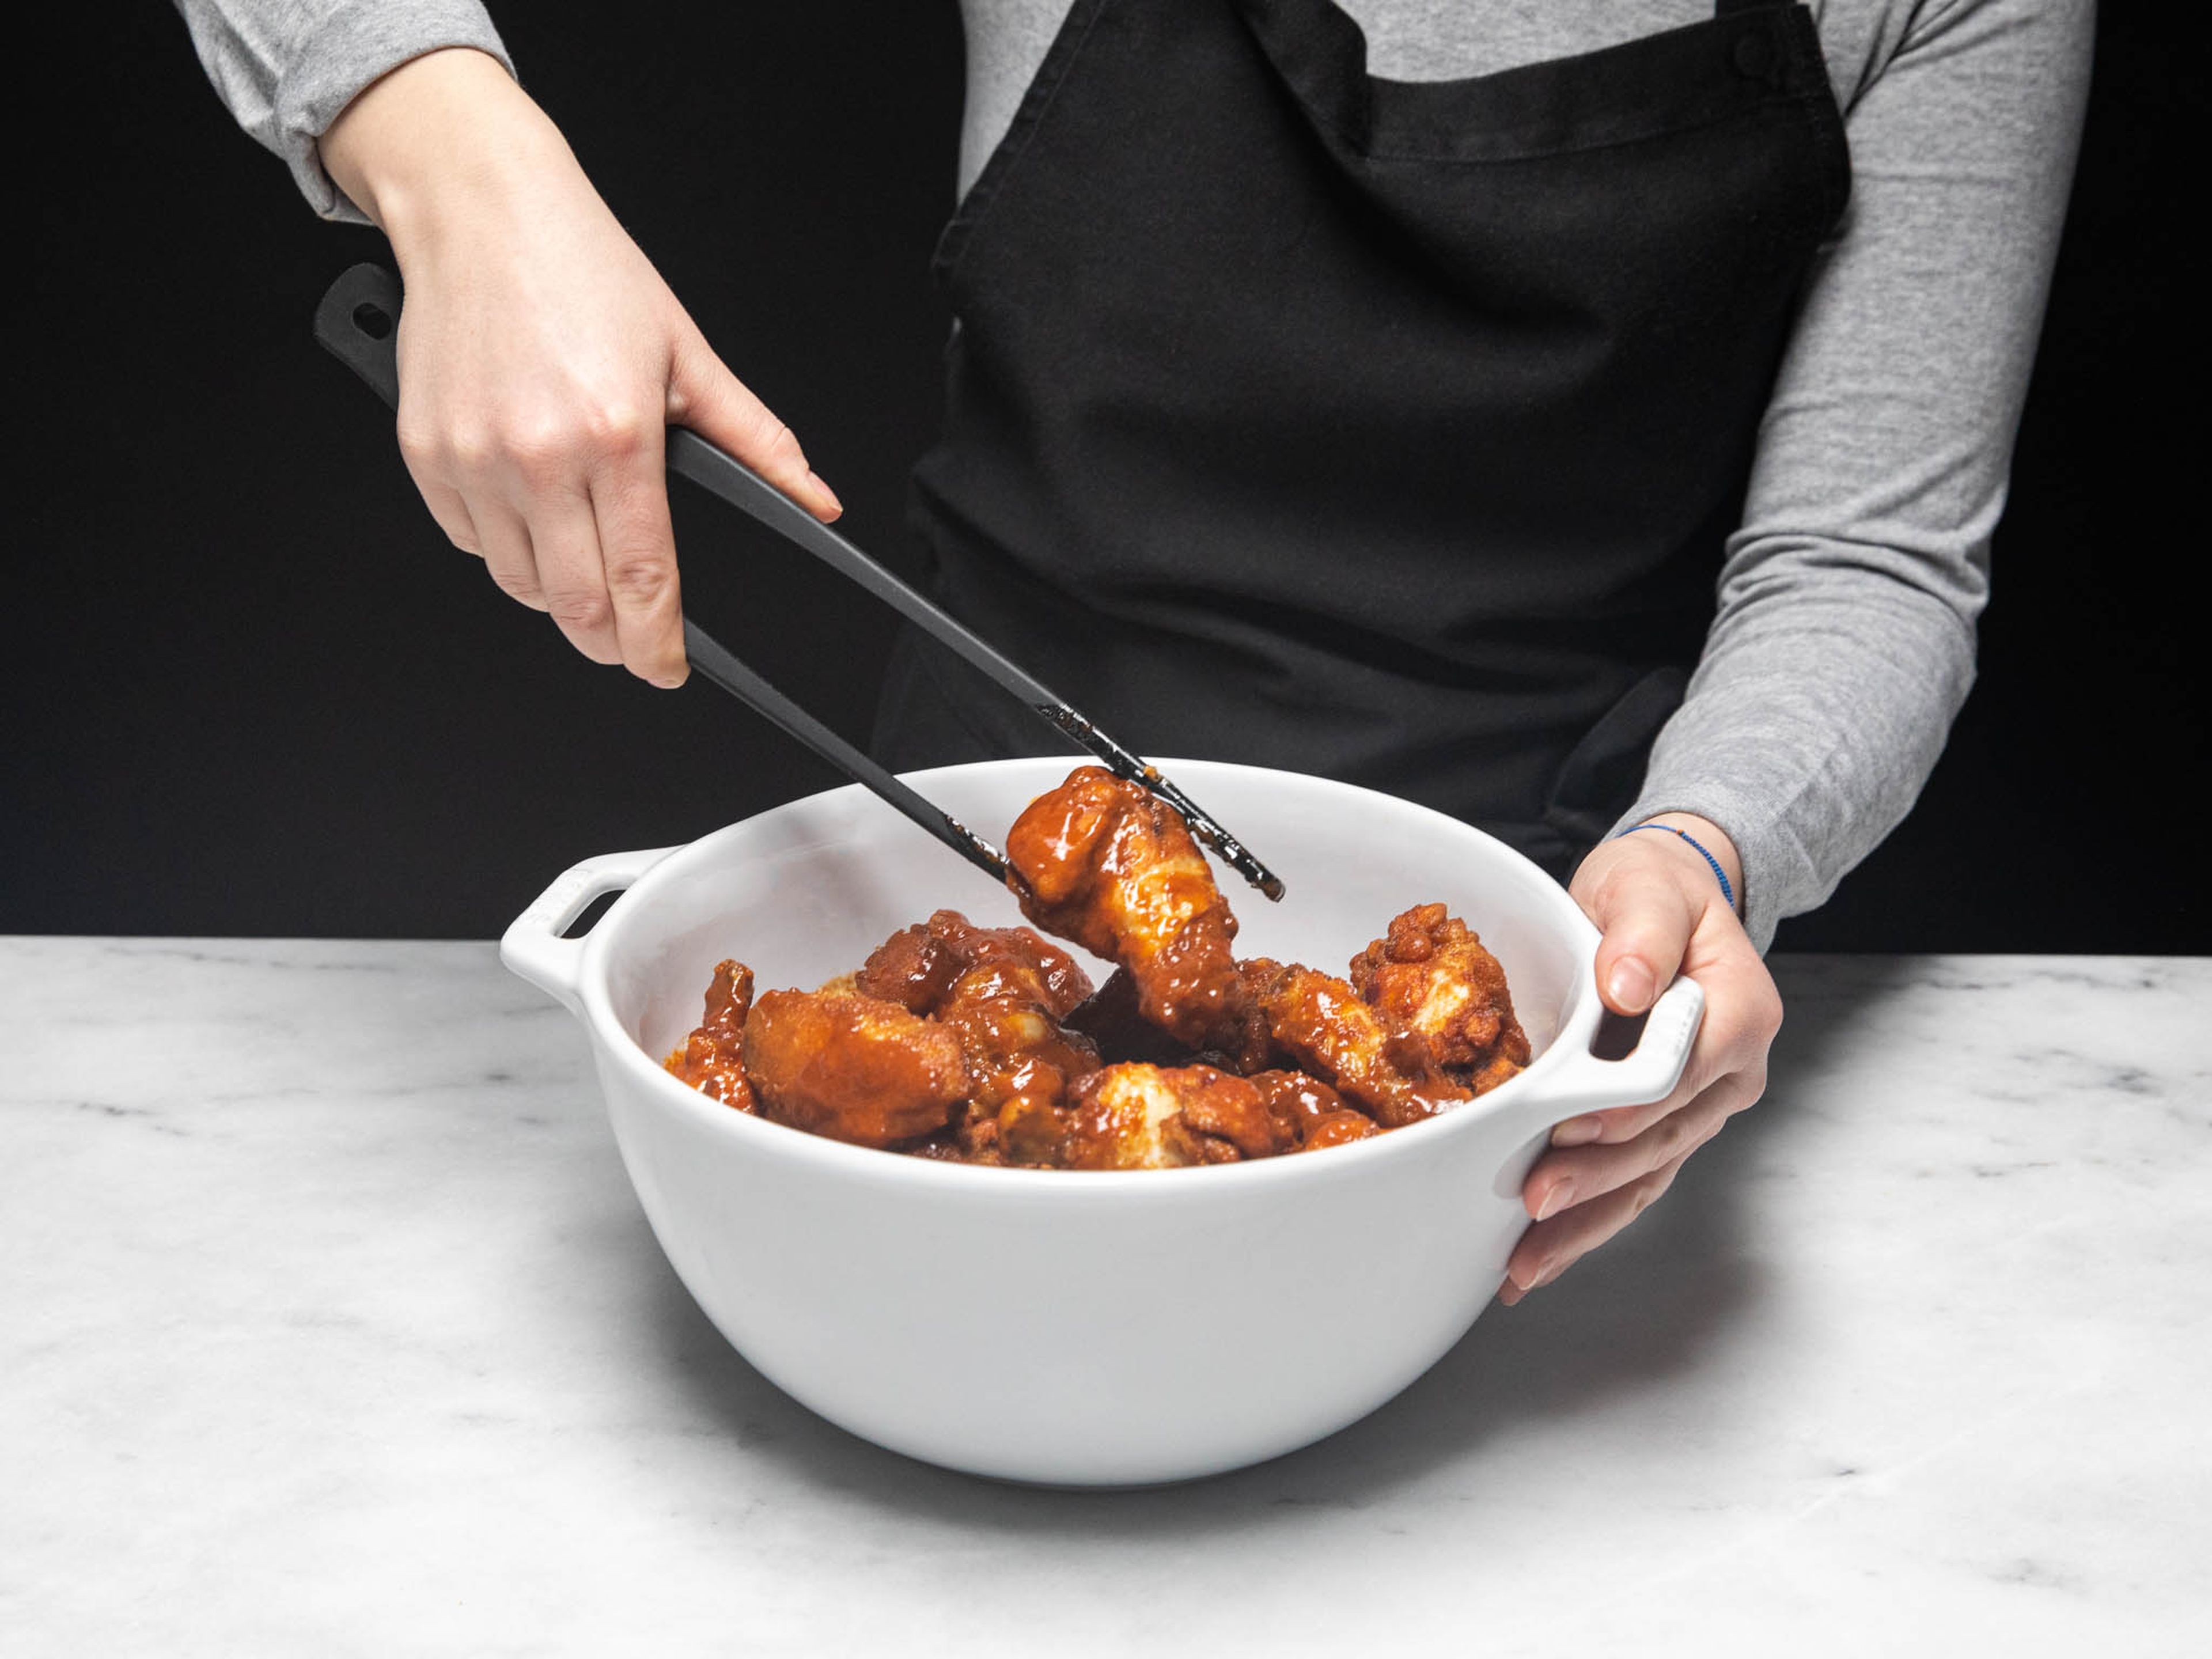 Place the fried wings in a large bowl, pour the red chili sauce on top and toss to coat. Serve on a plate and sprinkle with scallion, chilis, and sesame seeds. Enjoy!